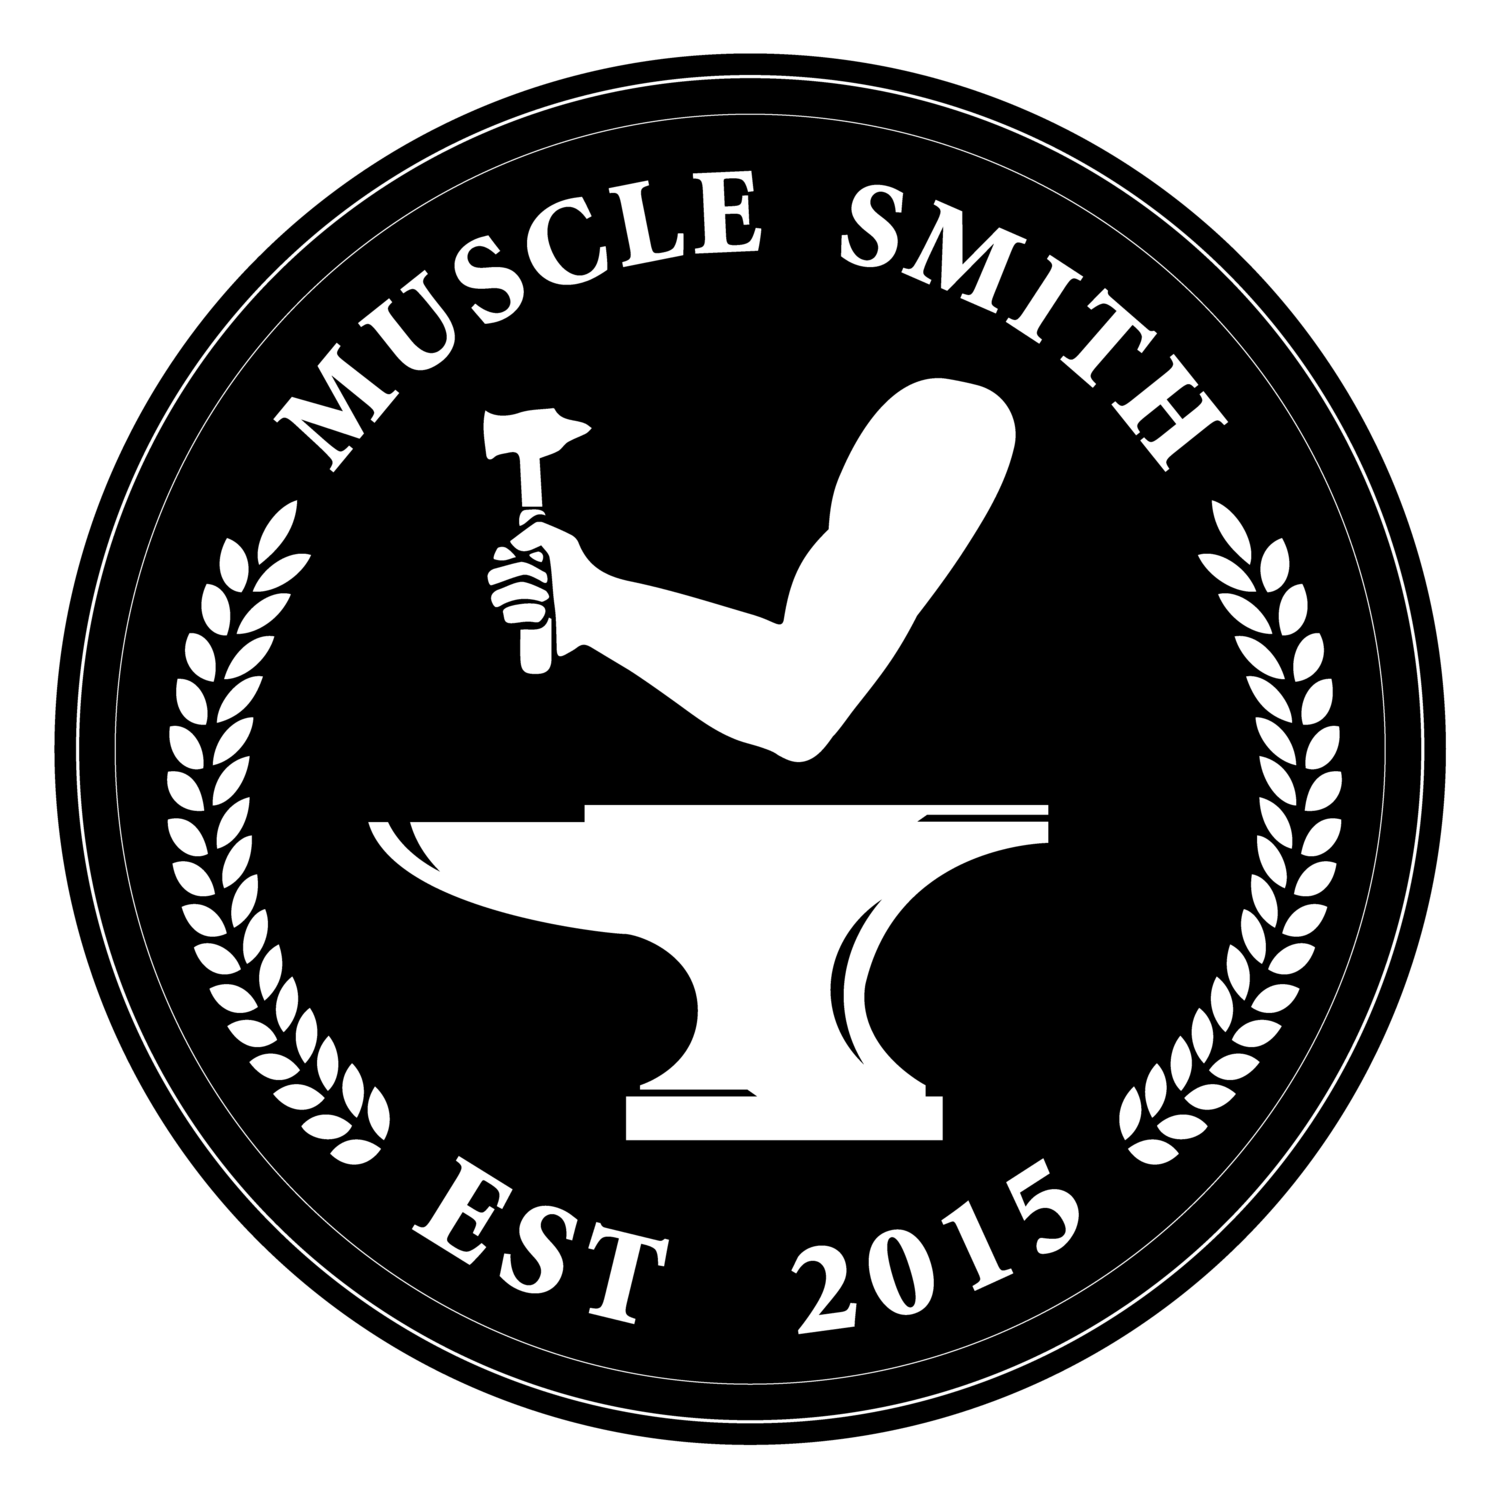 Muscle Smith 